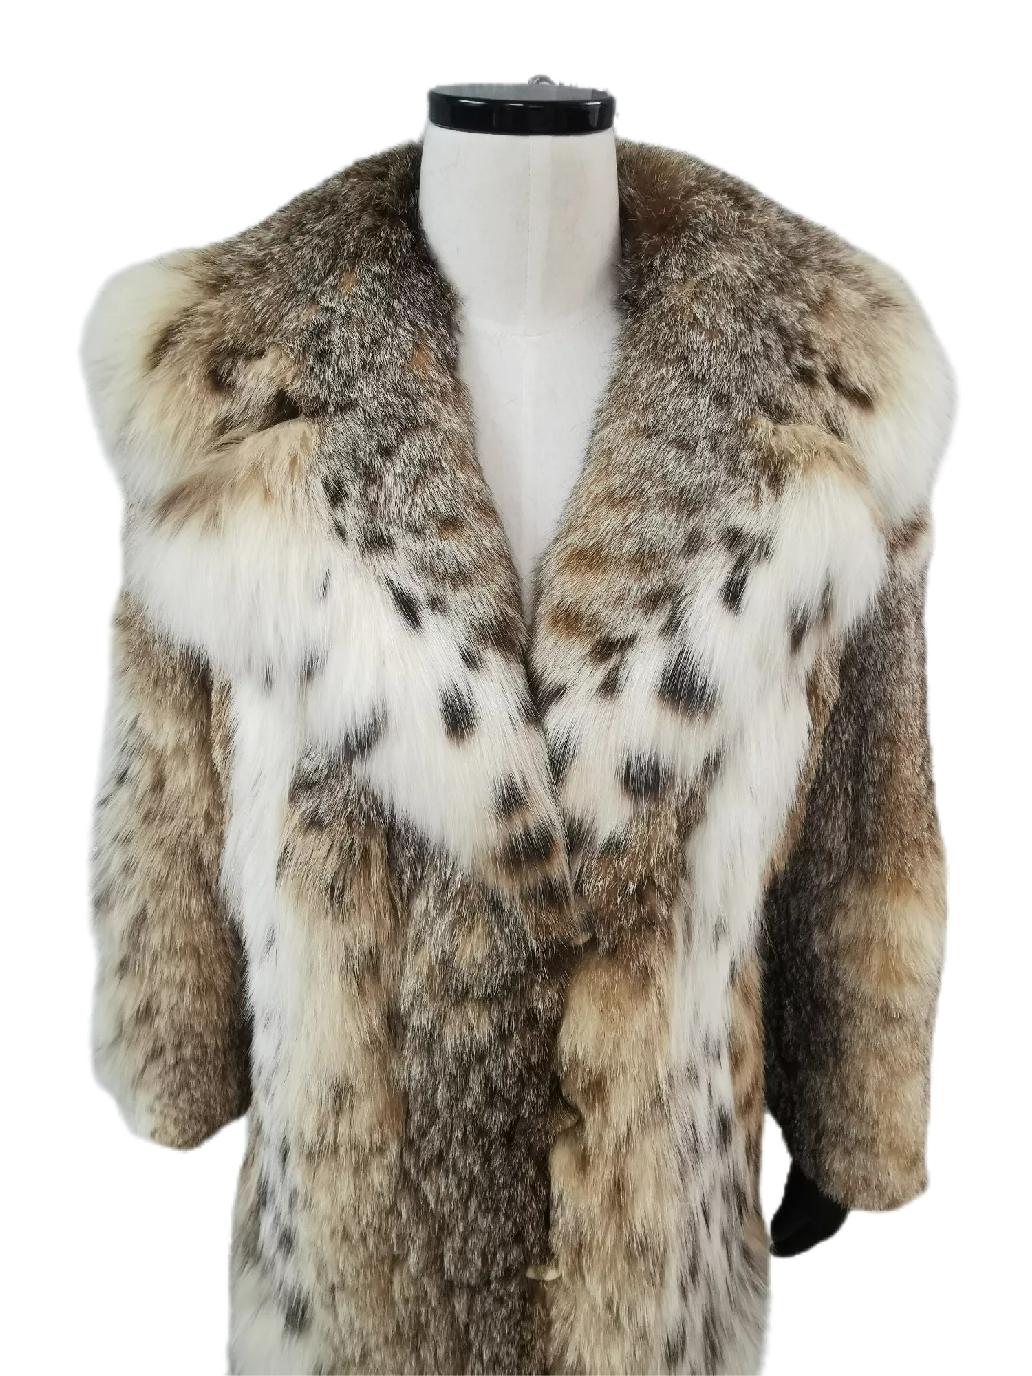 DESCRIPTION : BRAND NEW BOBCAT LYNX FUR COAT SIZE 4-6 :

Brand new, notch colar, supple skins, beautiful fresh fur, buttons for closure, too slit pockets, nice big full pelts skins in excellent condition.

This item is made in Canada with the best